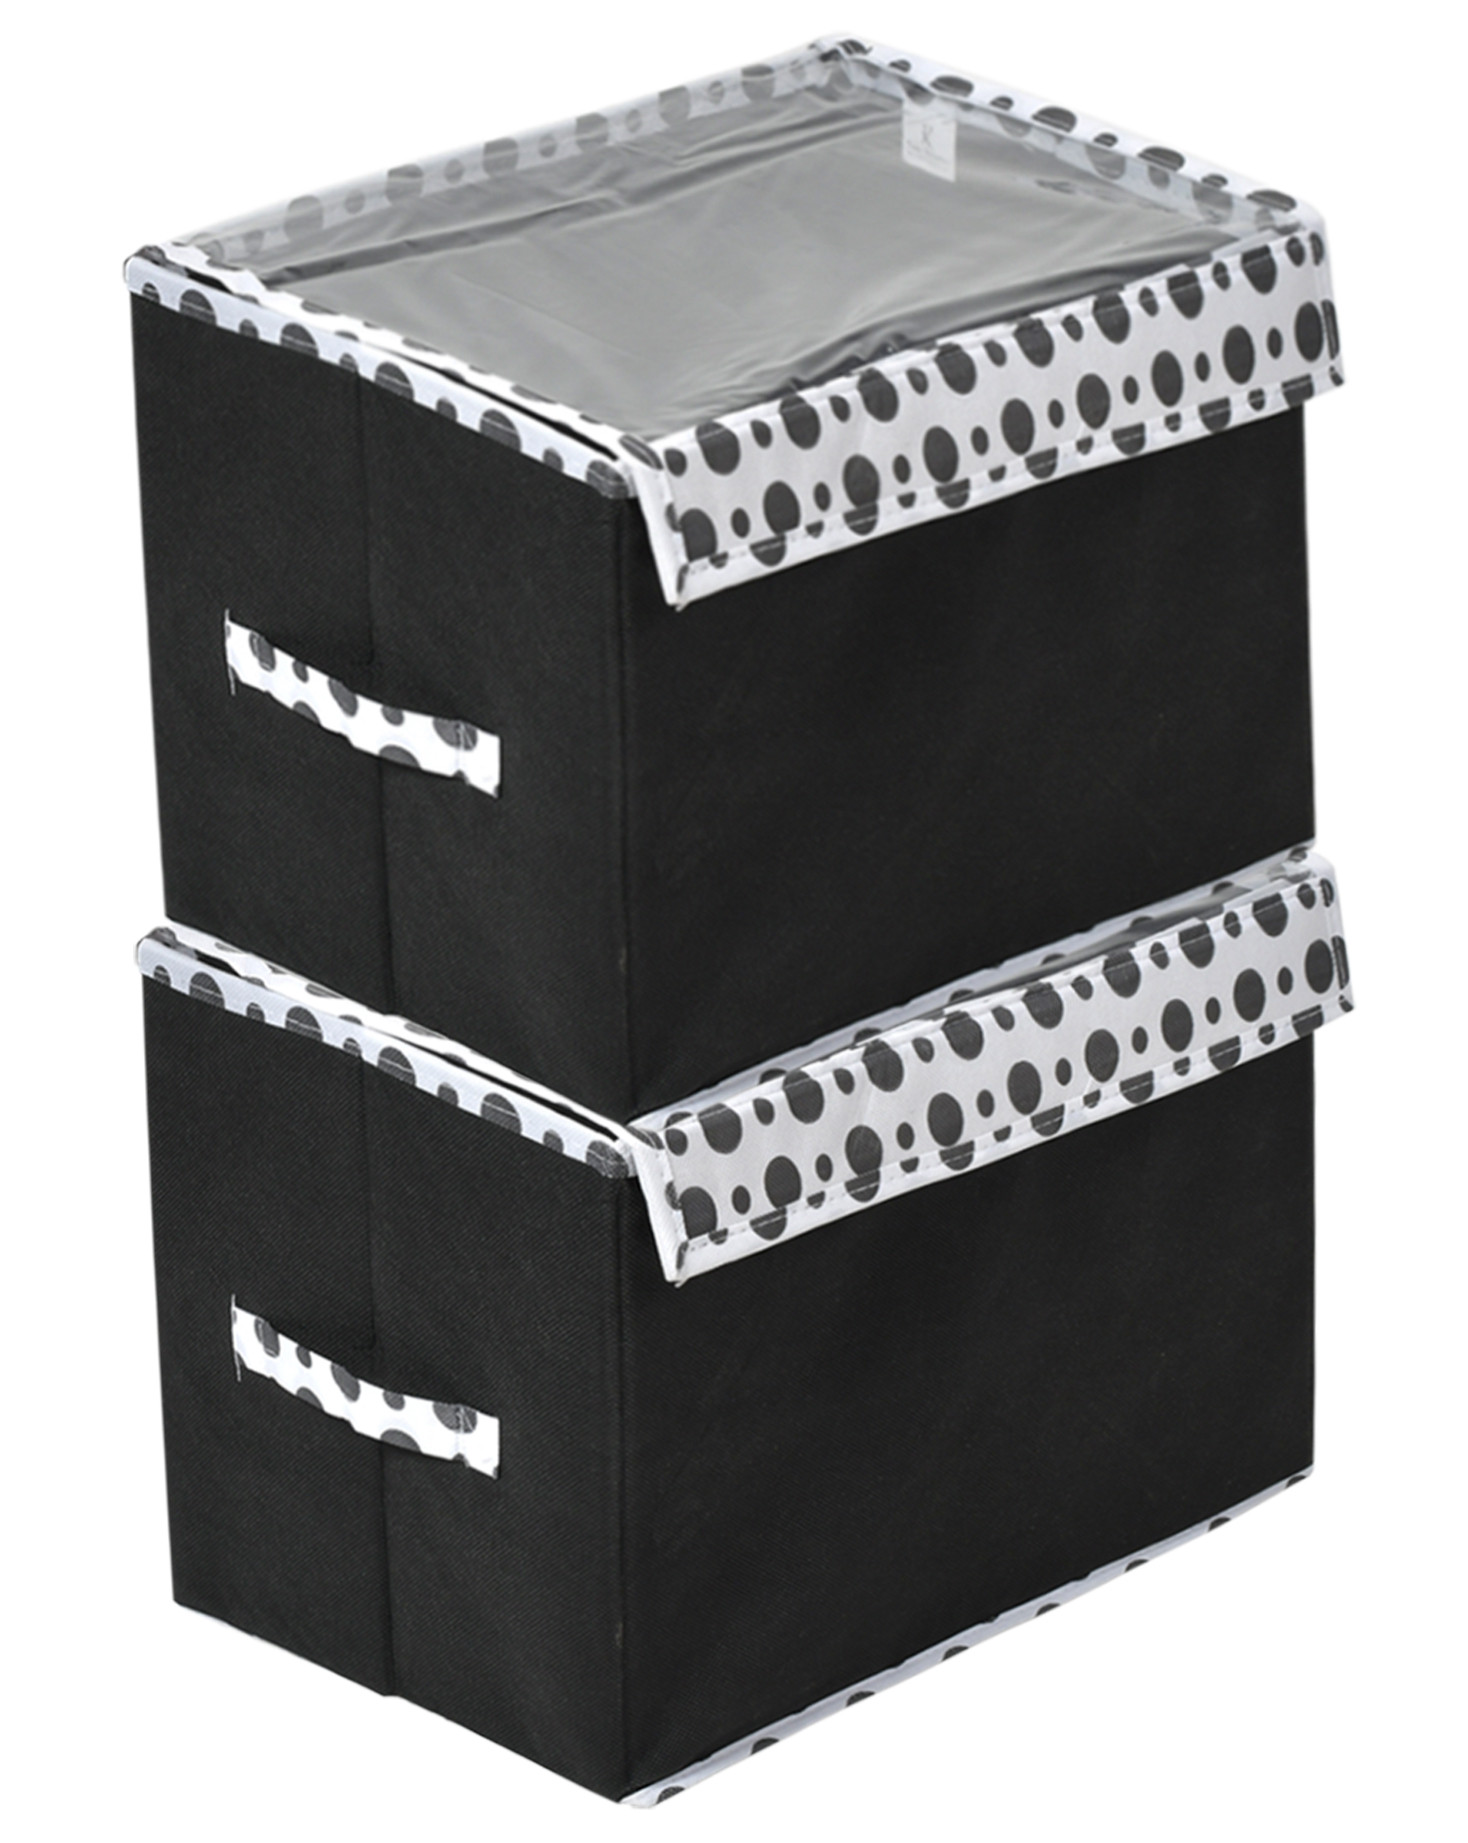 Kuber Industries Dot Printed Multiuses Large Non-Woven Storage Box/Organizer With Tranasparent Lid (Black) -44KM0421